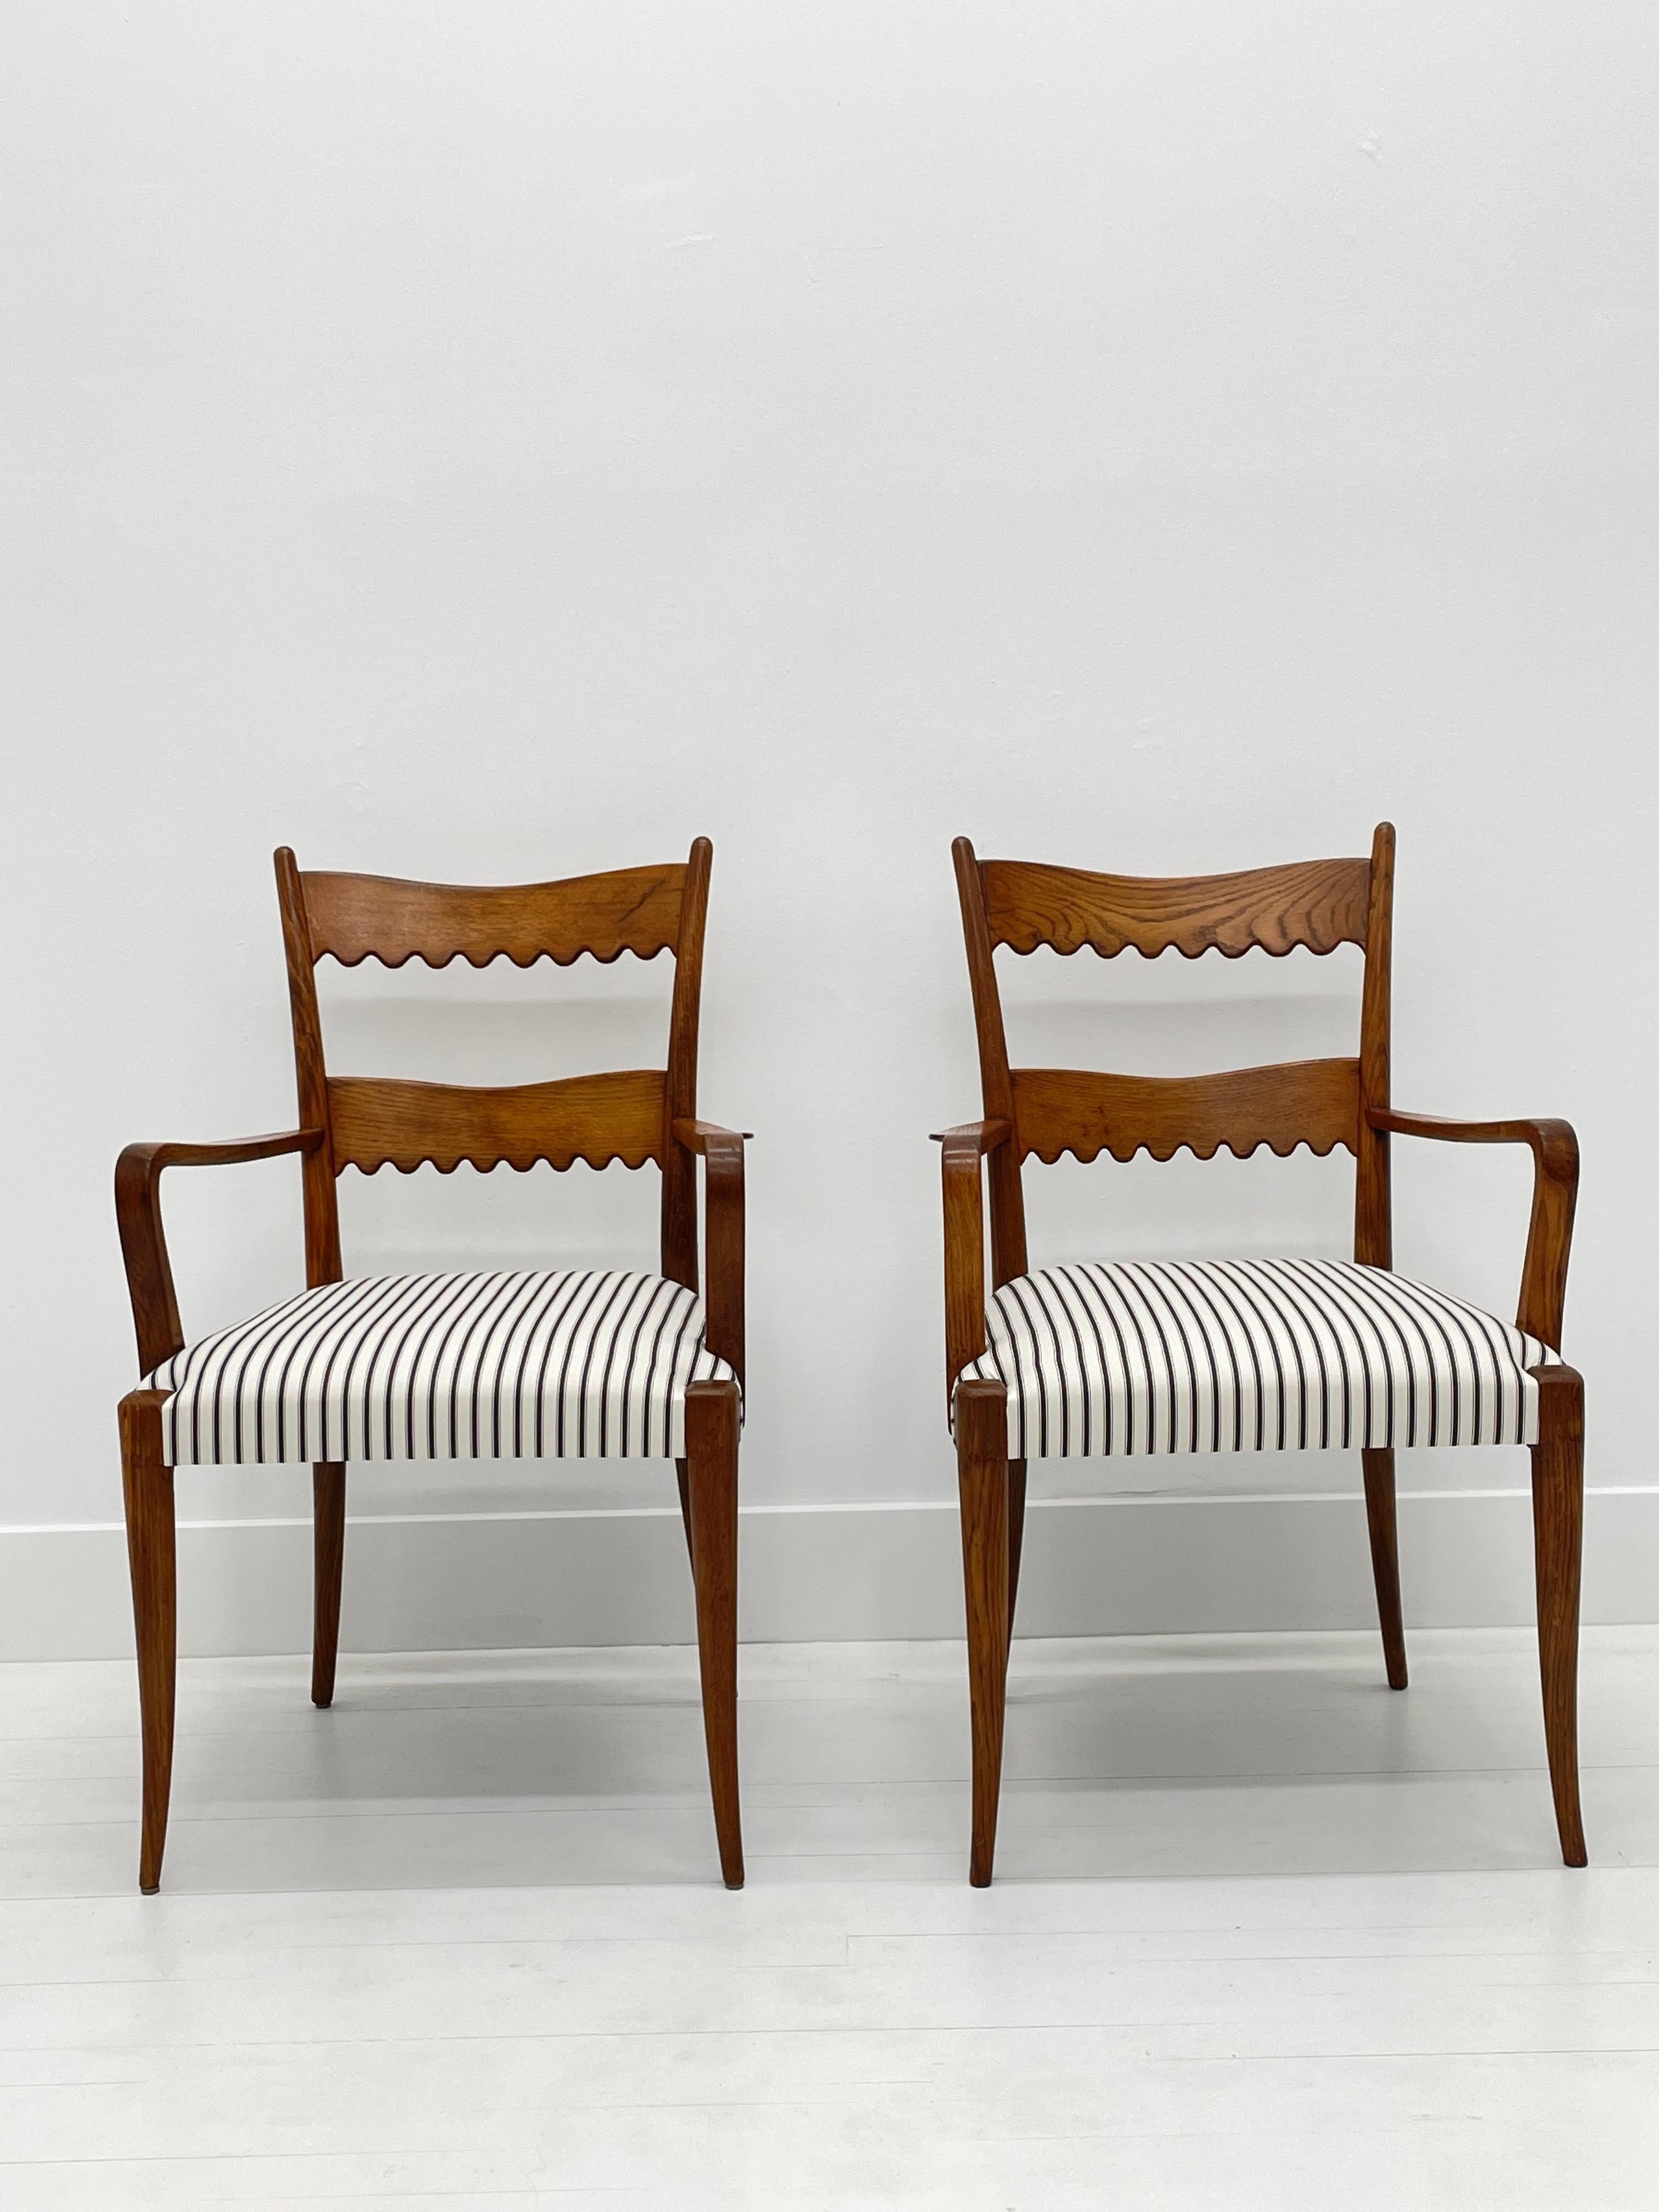 Set of two Scallop backed armchairs in Chestnut wood, Italy, 1940's. Attributed to Paolo Buffa. 

The lines of these chairs are masterful— the whimsical scalloped backs are beautifully proportioned and rendered. The graceful notched arms add to